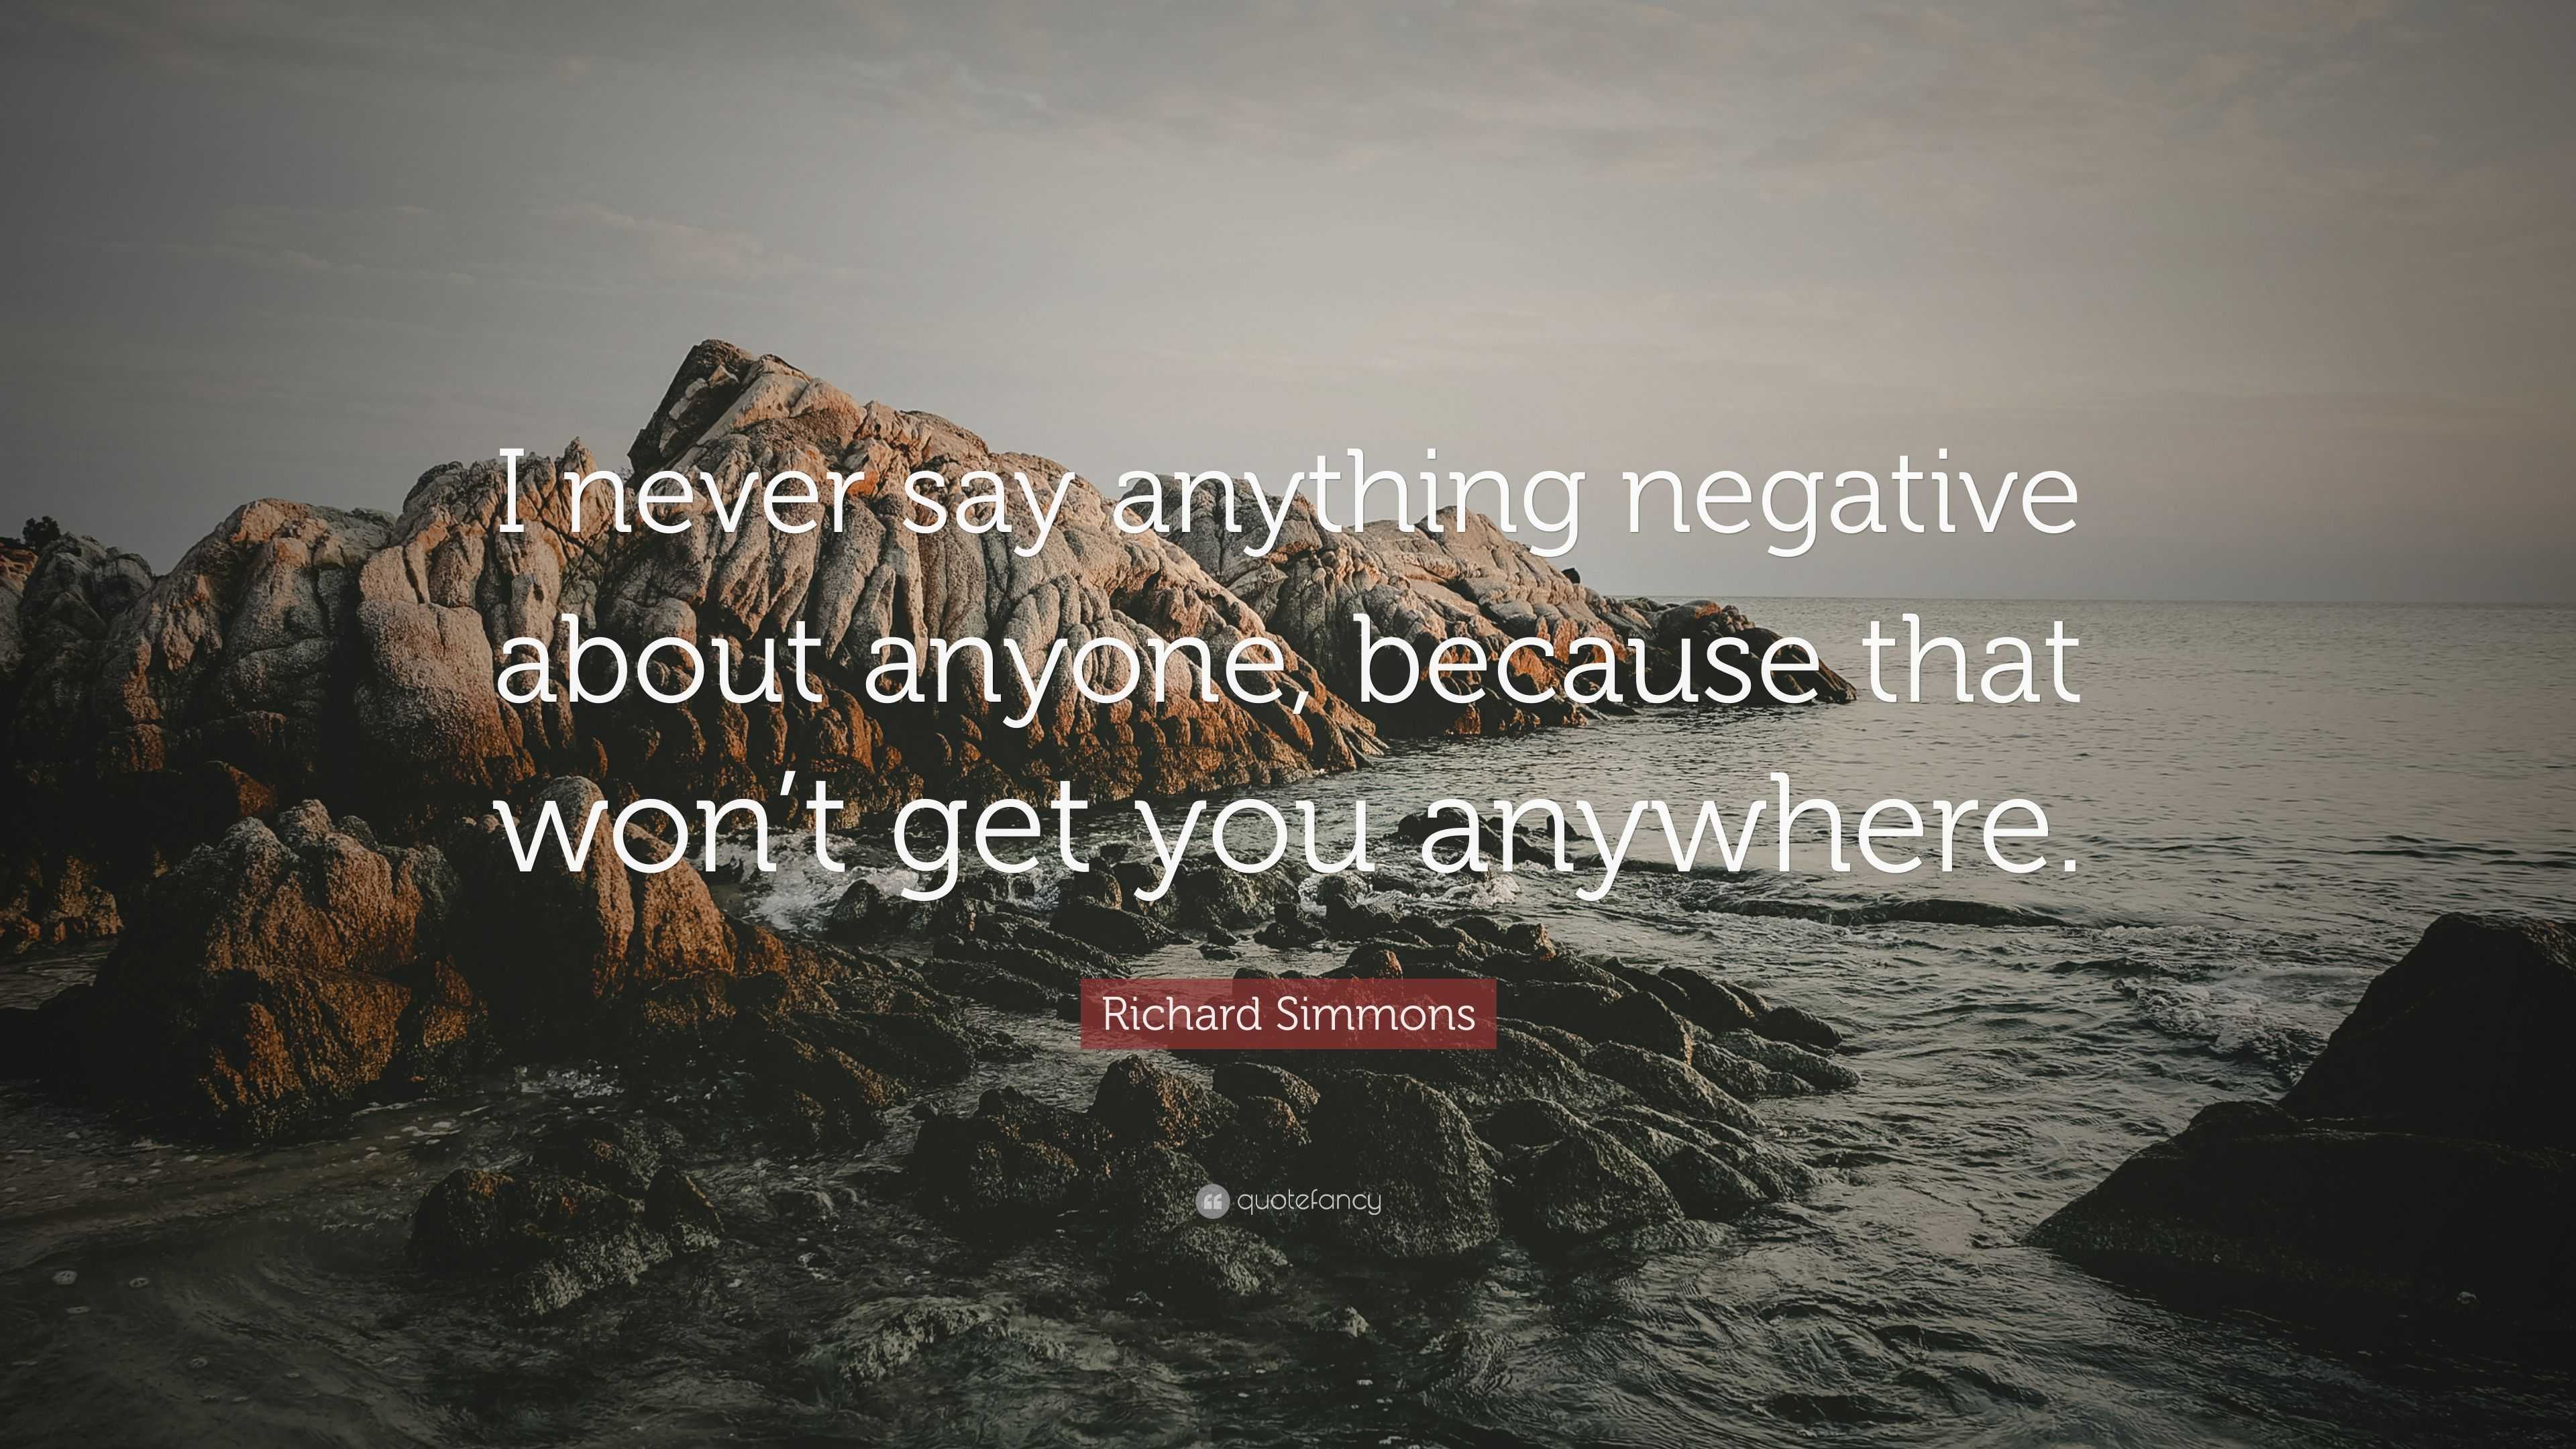 Richard Simmons Quote: “I never say anything negative about anyone ...